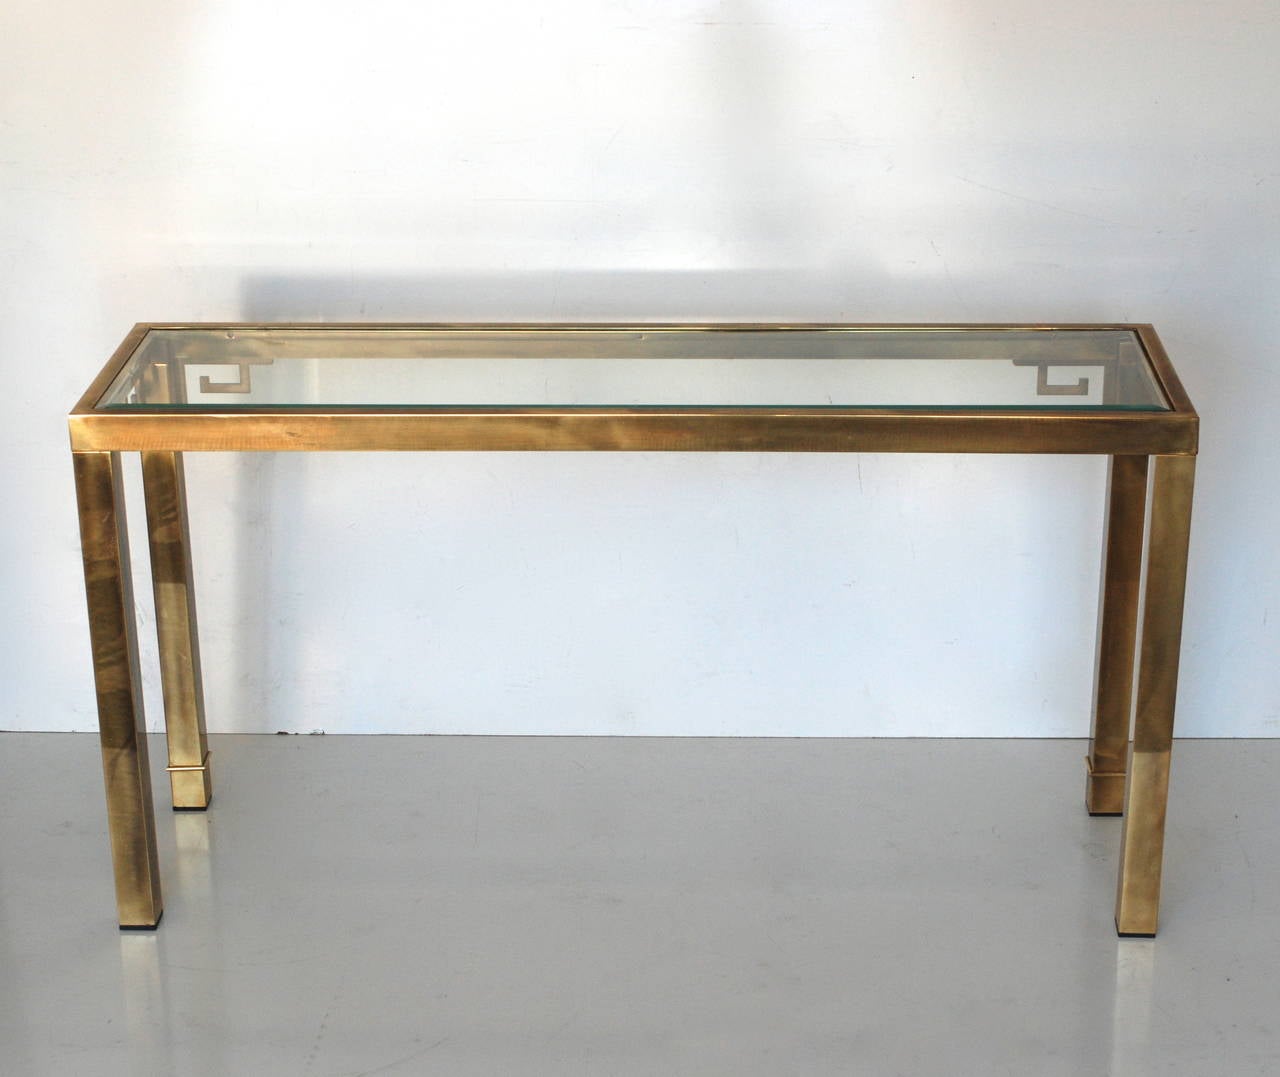 A solid brass console manufactured by Mastercraft. There is a beveled glass top that sits flush on the top of the piece. The brass has a nice warm antique patina to it.